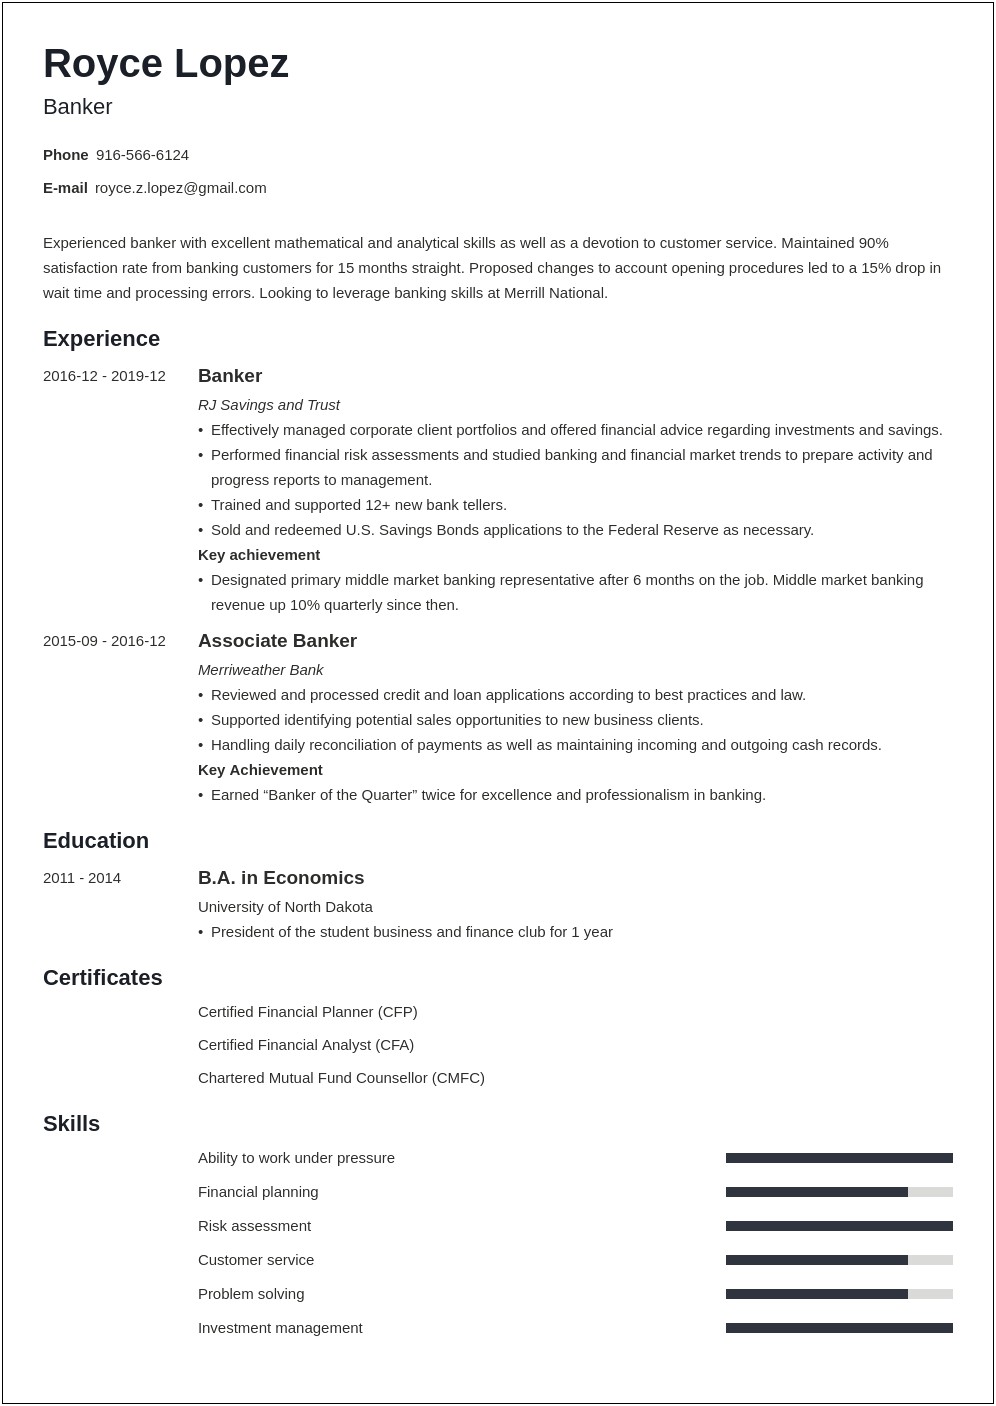 Resume Format For Bank Job In India